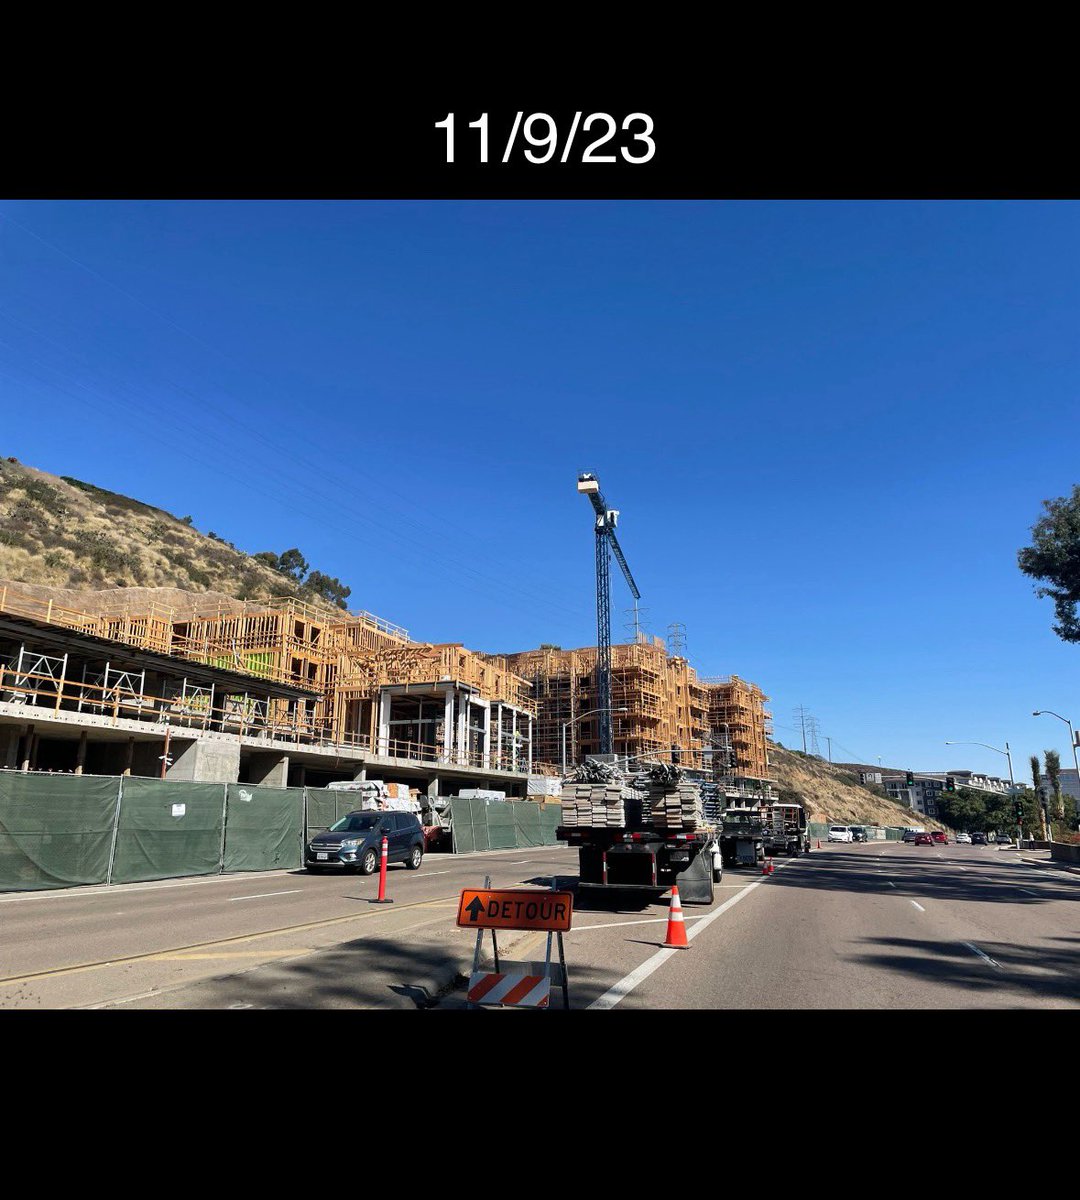 Lots of changes have been completed on this luxury apartment complex since Nov 2023 till today! #MissionValley #SanDiego